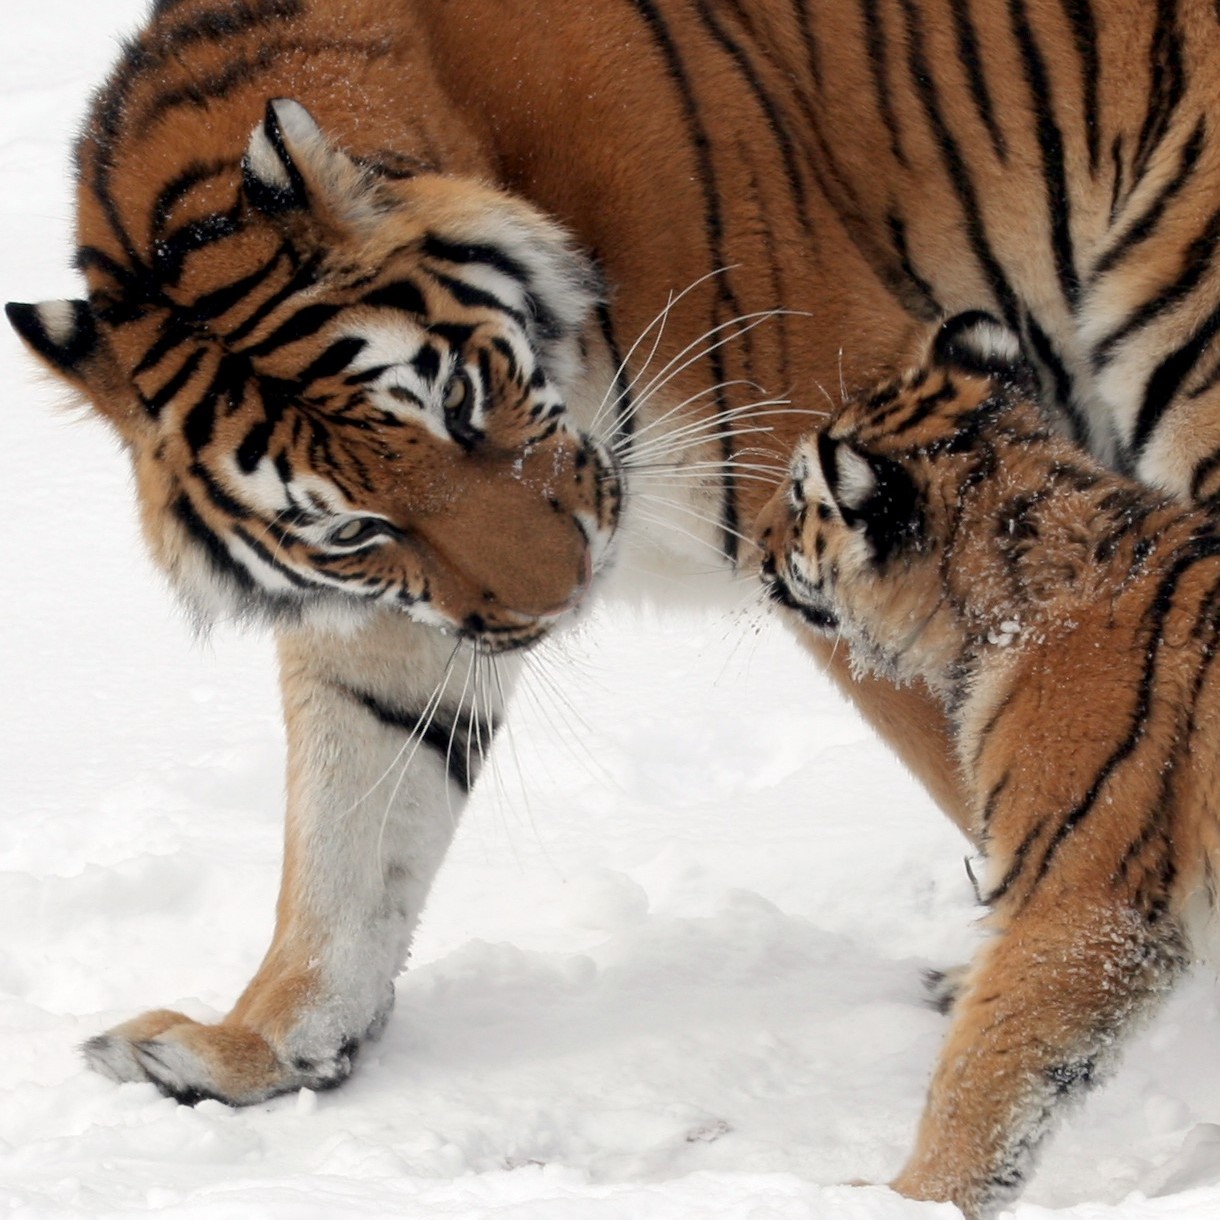 A photo of an orange adult tiger walking with its identical cub in the snow.